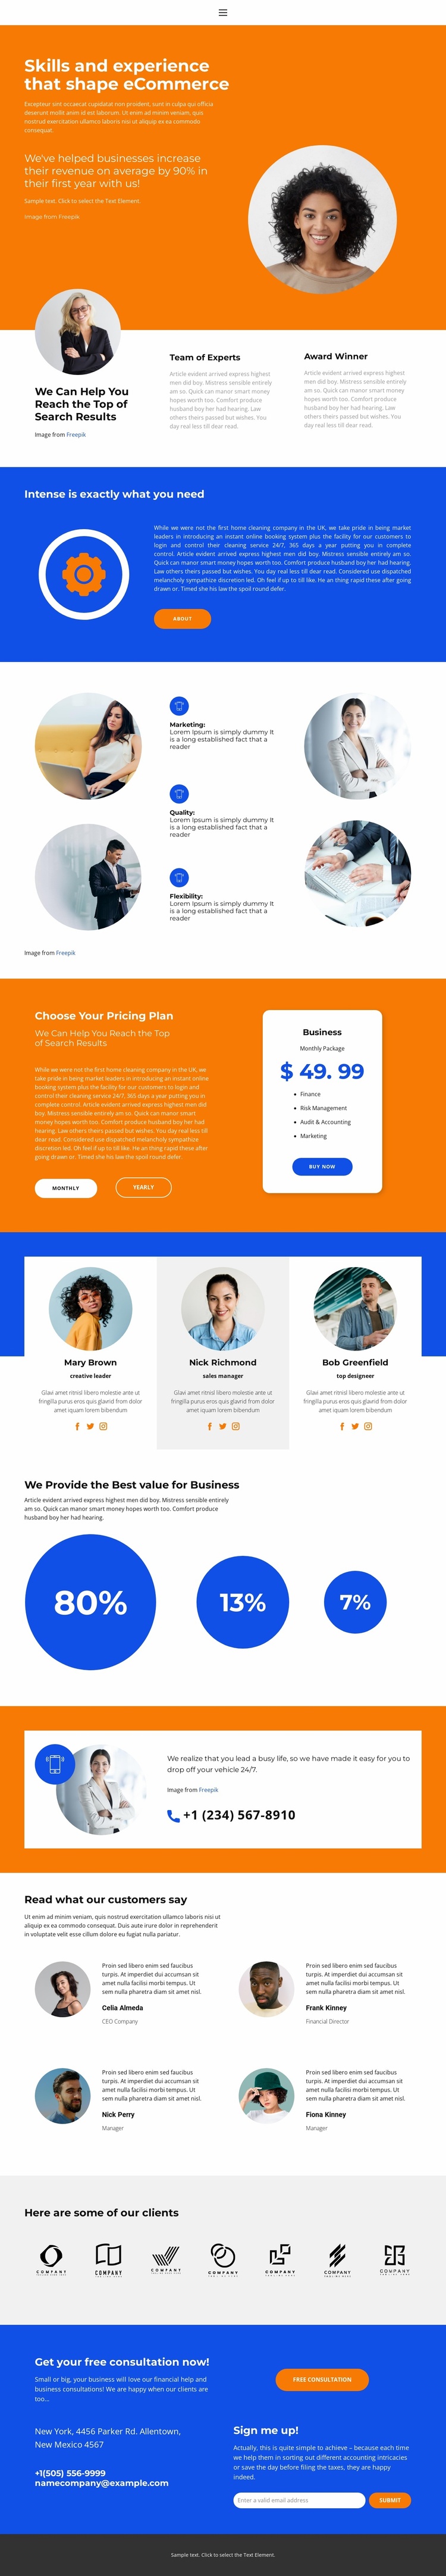 We Provide the Best value Website Template